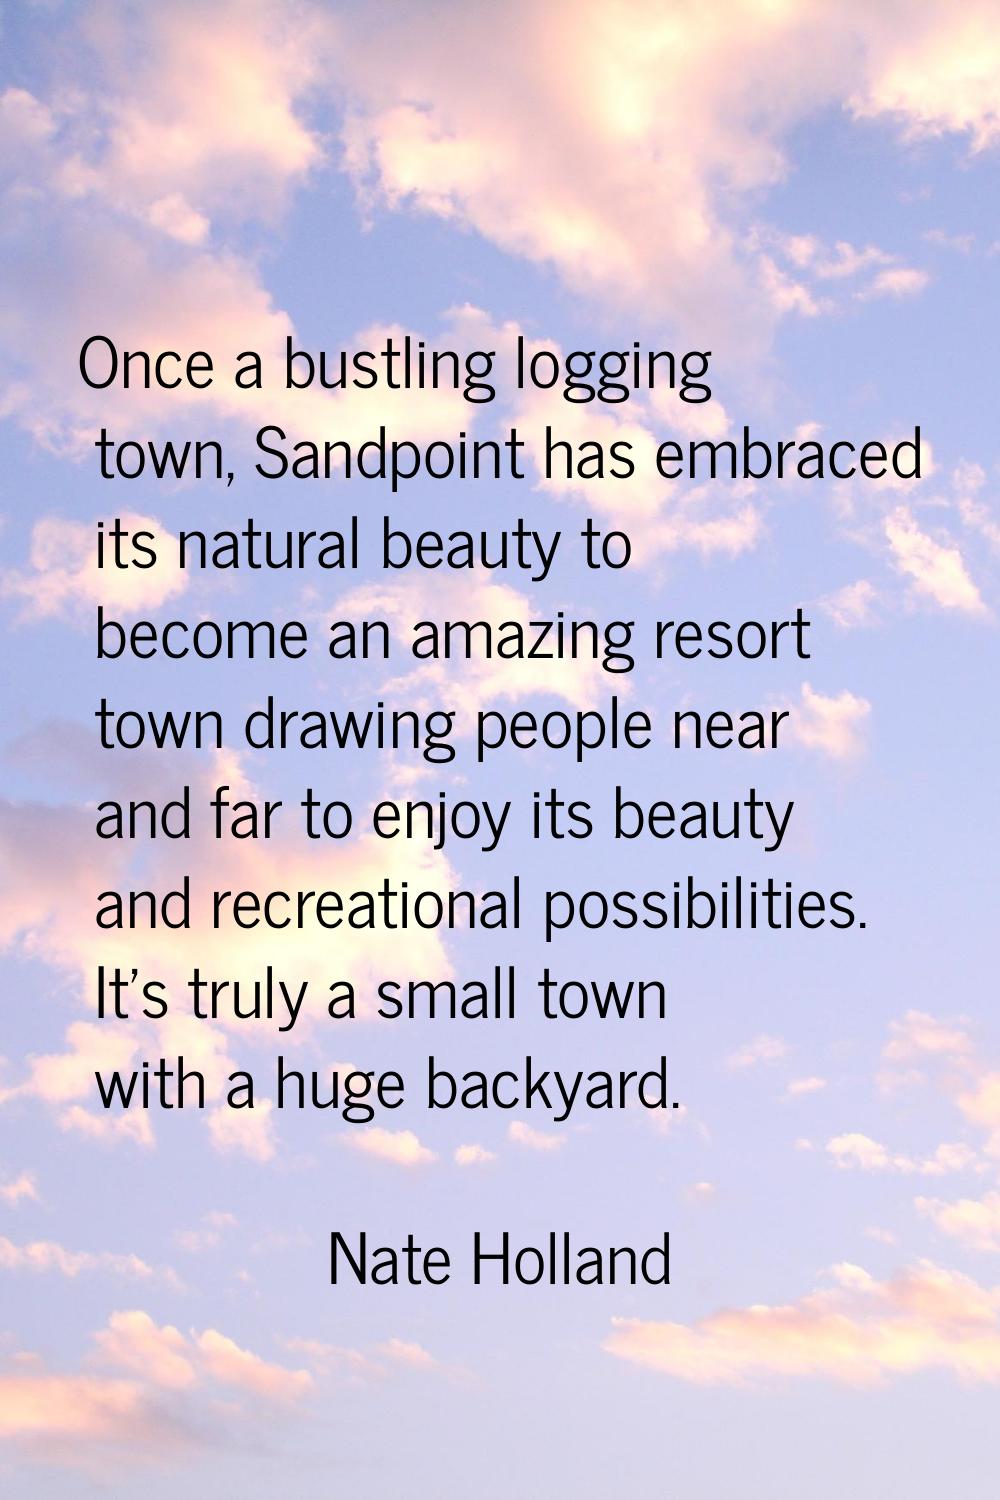 Once a bustling logging town, Sandpoint has embraced its natural beauty to become an amazing resort